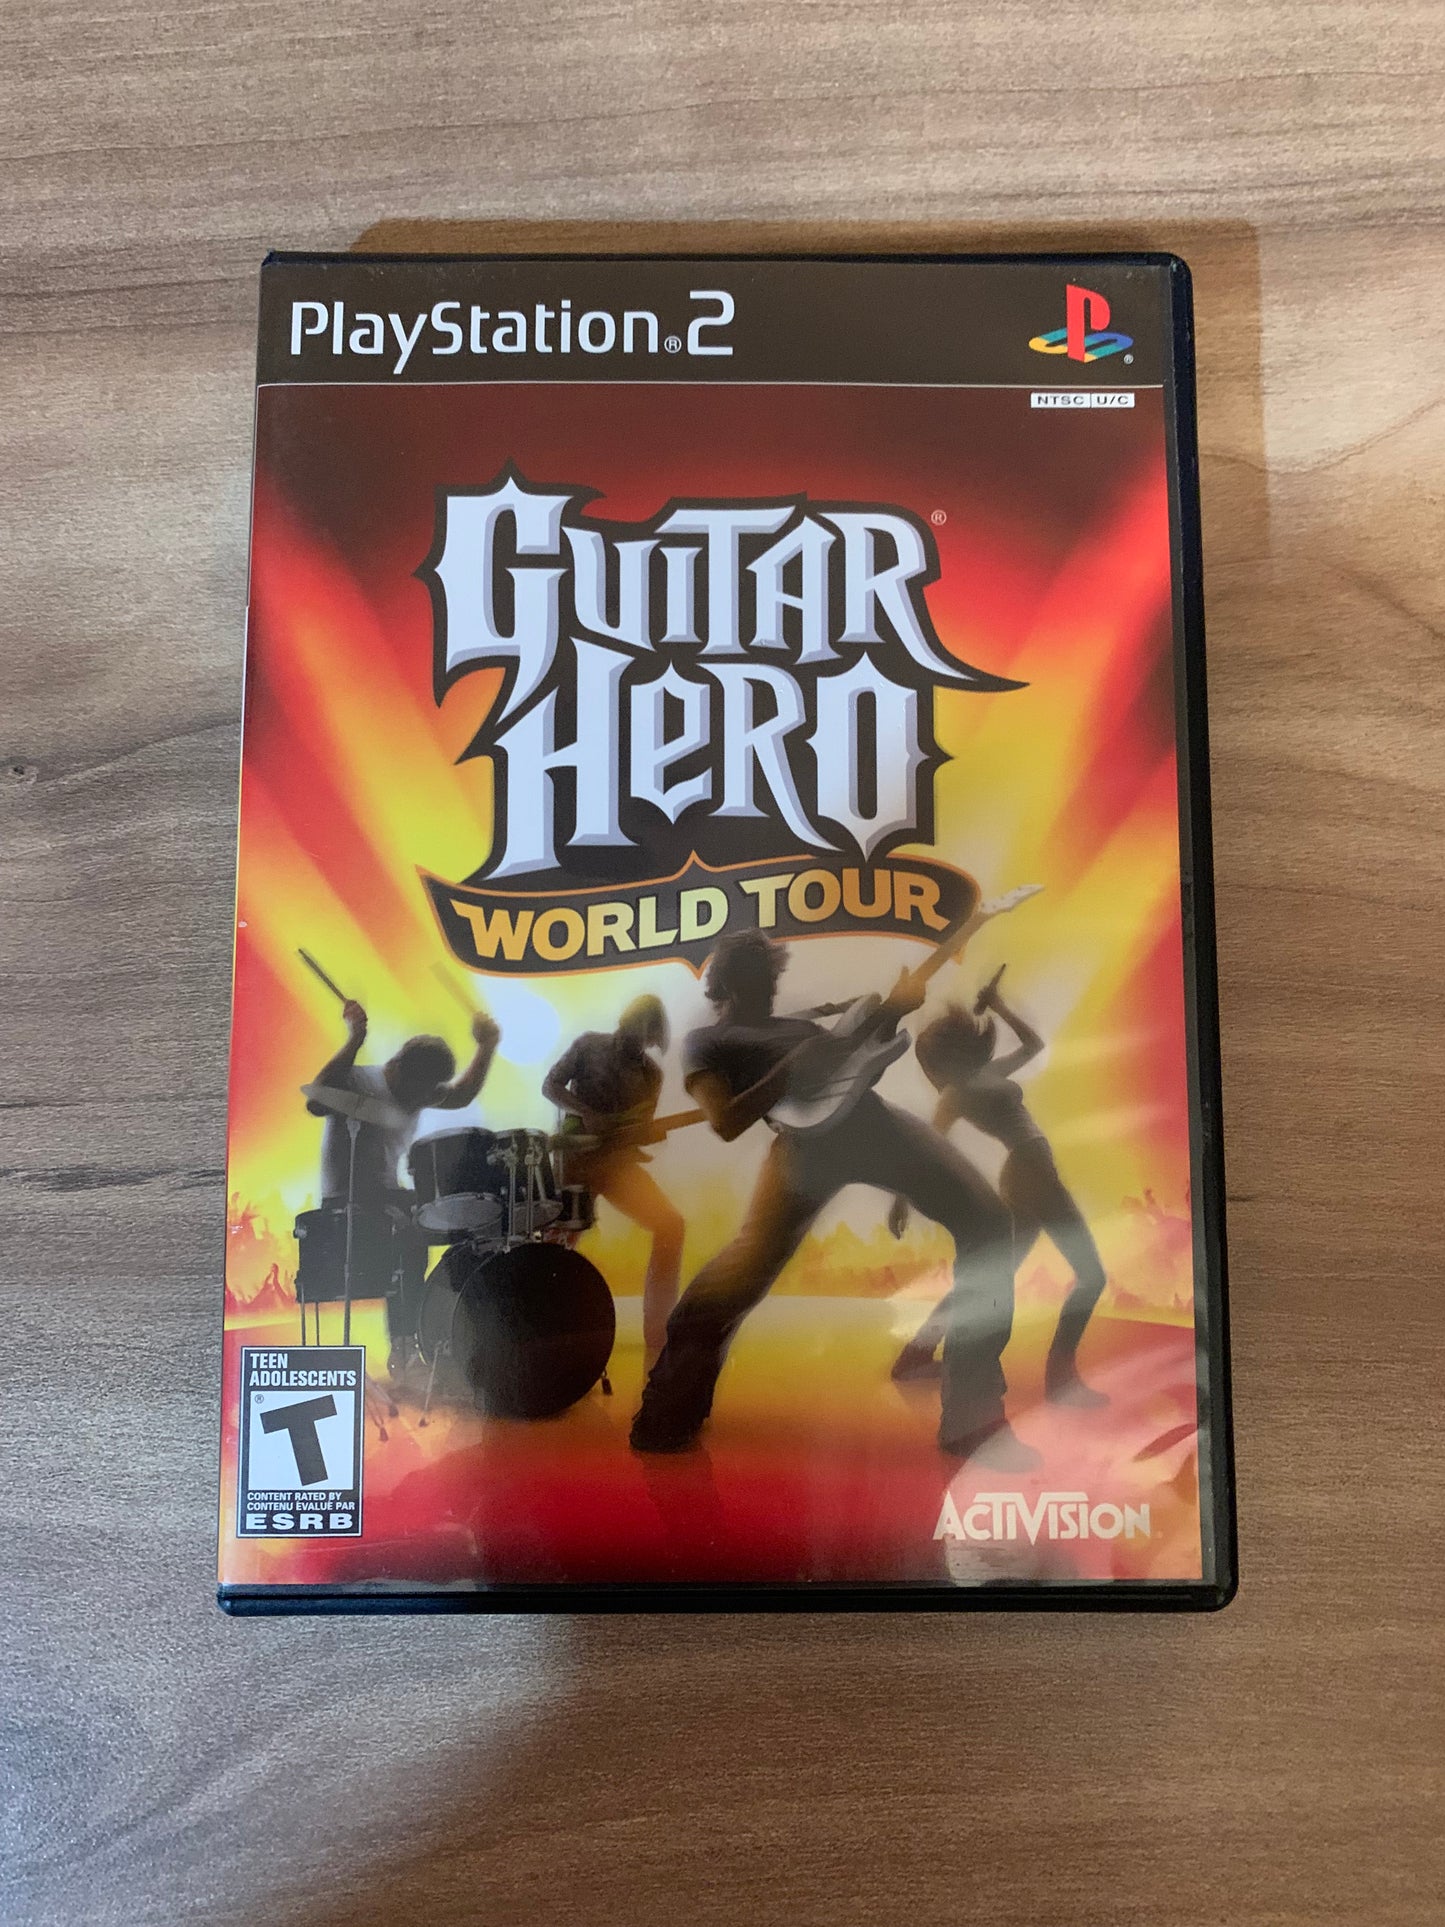 SONY PLAYSTATiON 2 [PS2] | GUiTAR HERO WORLD TOUR